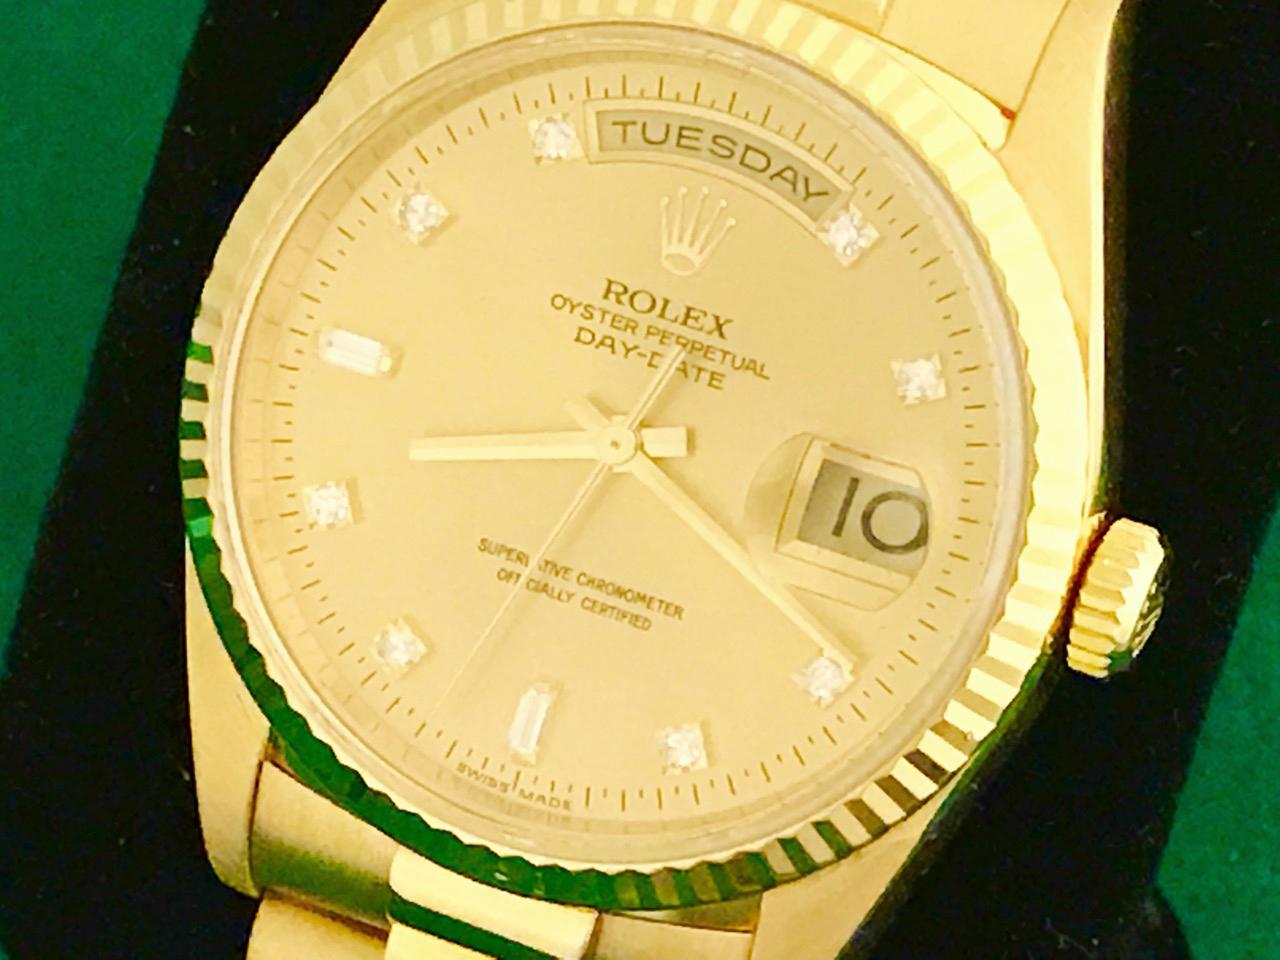 Rolex President Day-Date Model 18238 Pre Owned Mens  Automatic wrist watch. Rolex Champagne Dial with Diamond hour markers (8 rounds & 2 baguettes). 18k Yellow Gold case with fluted bezel (35mm). 18k Yellow Gold hidden clasp President bracelet.